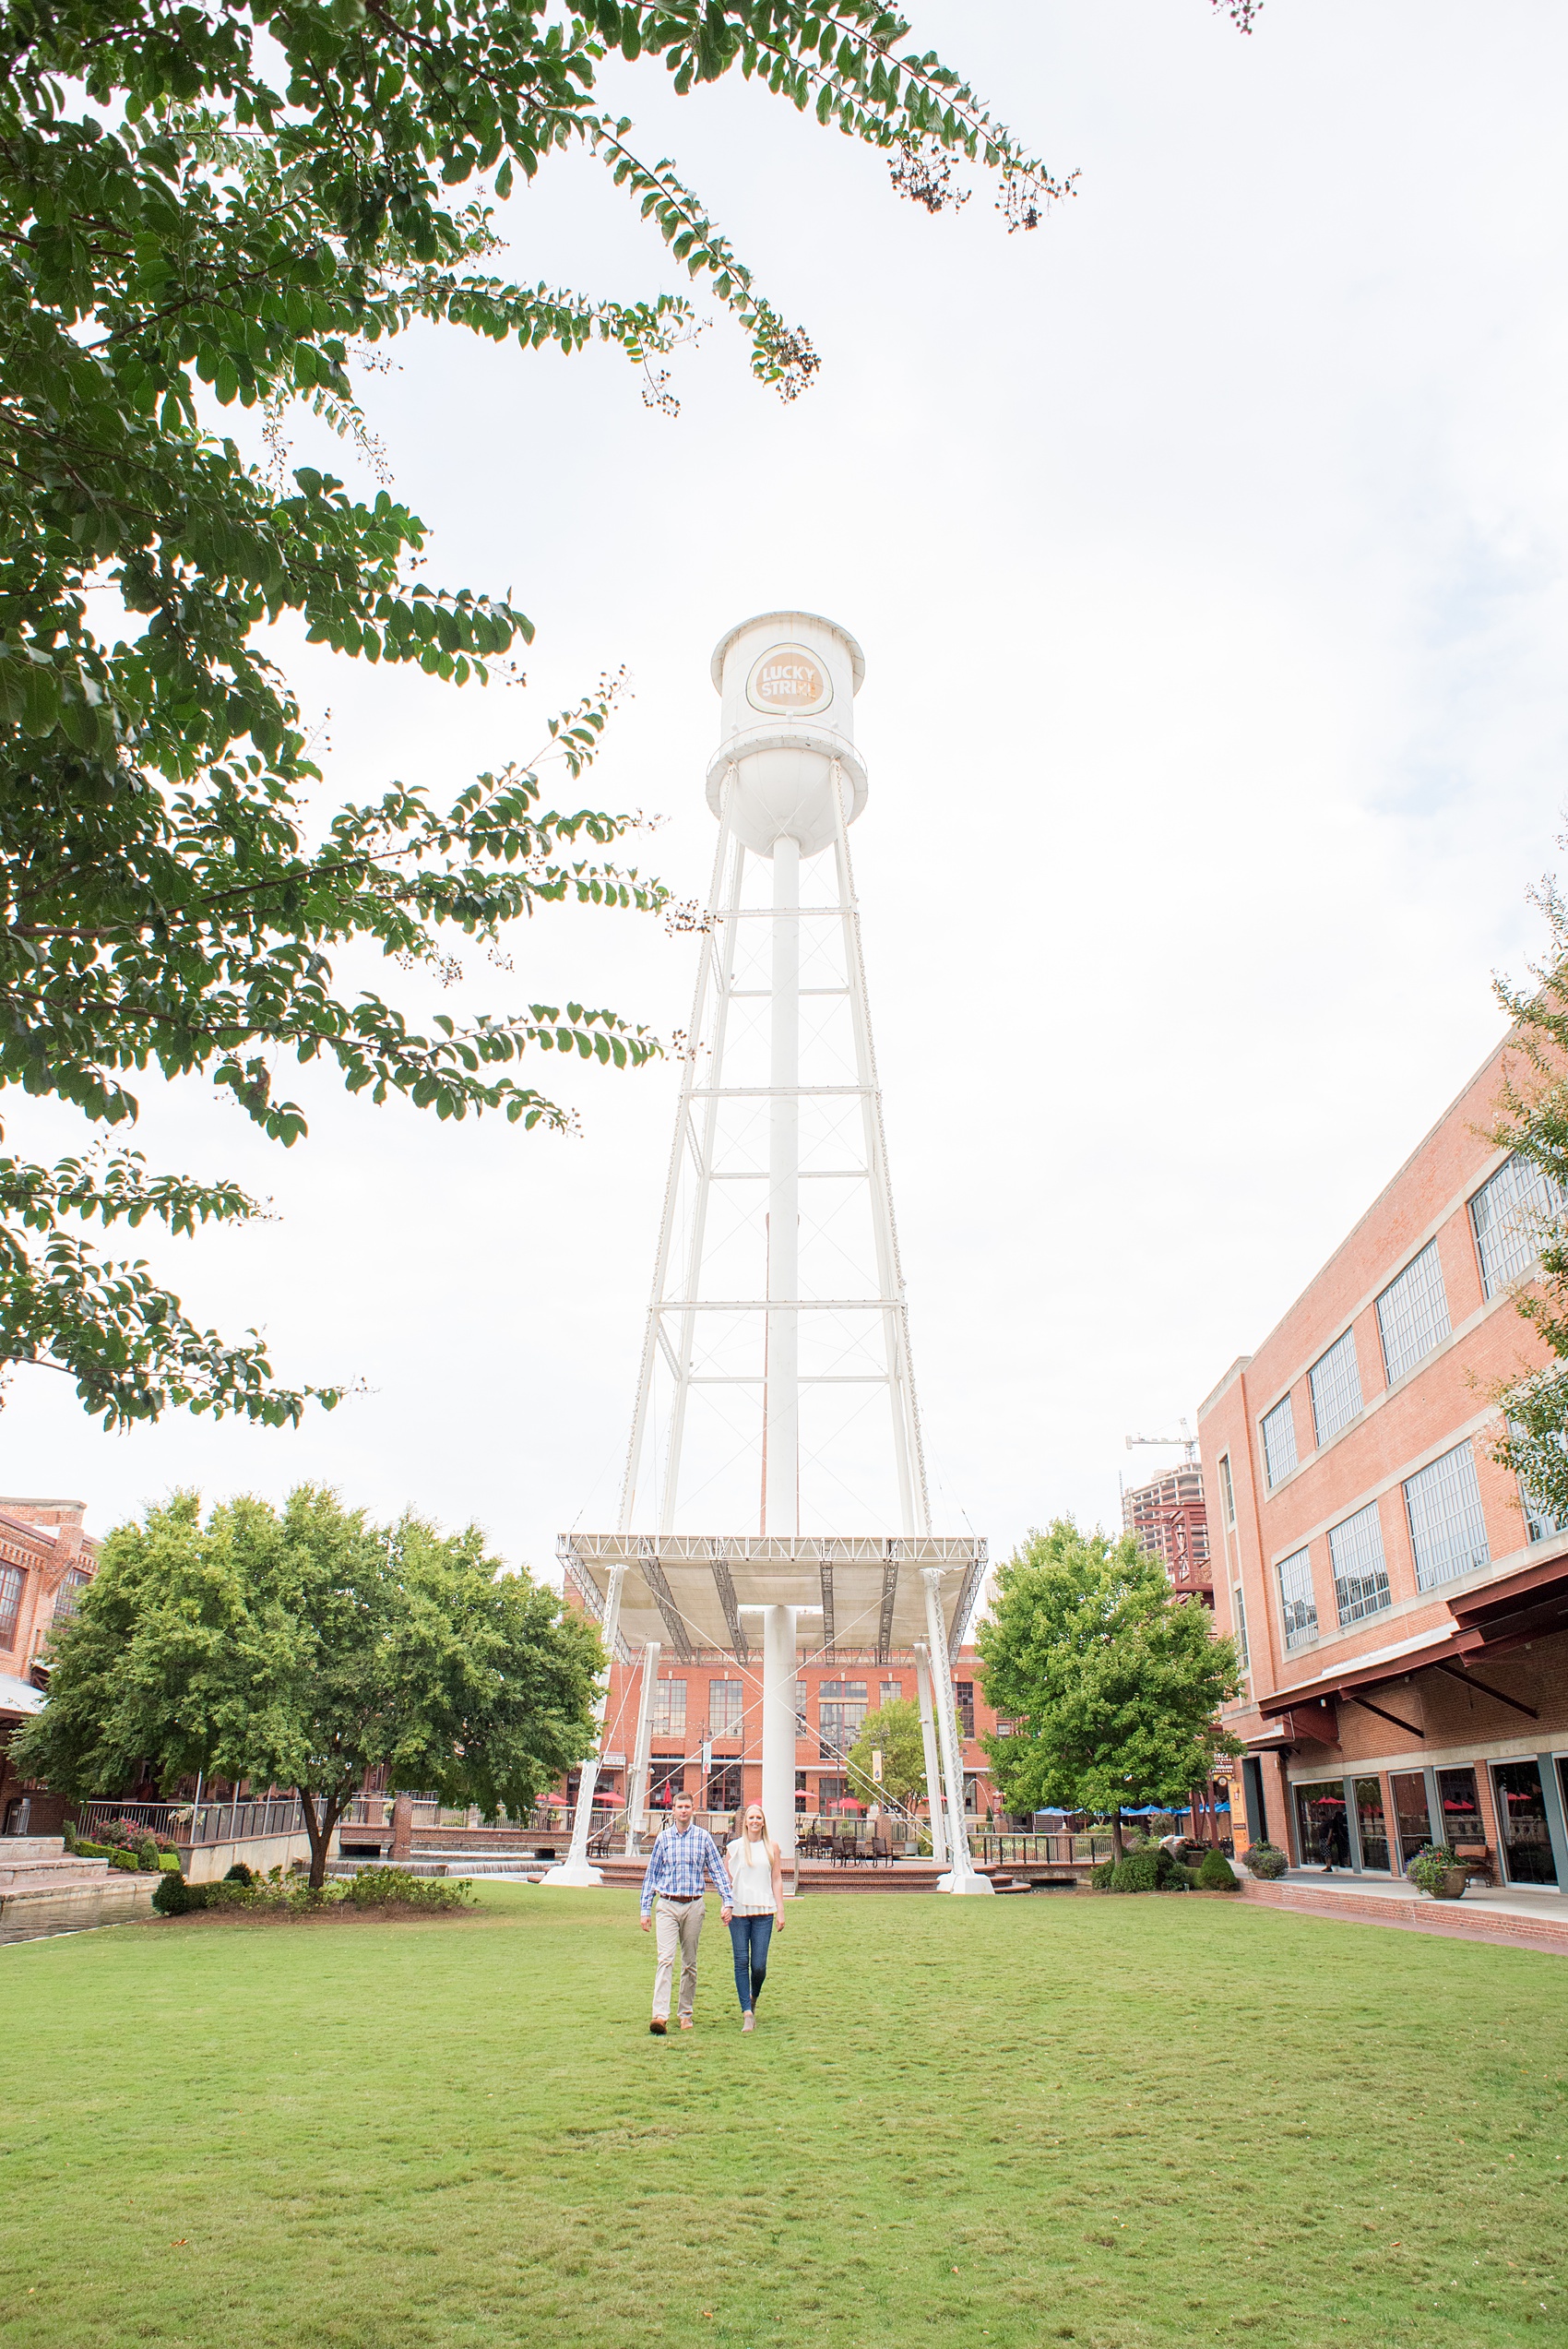 Mikkel Paige Photography photos from an engagement session at Durham's American Tobacco Campus in North Carolina. Picture of the couple near the city's iconic water tower.